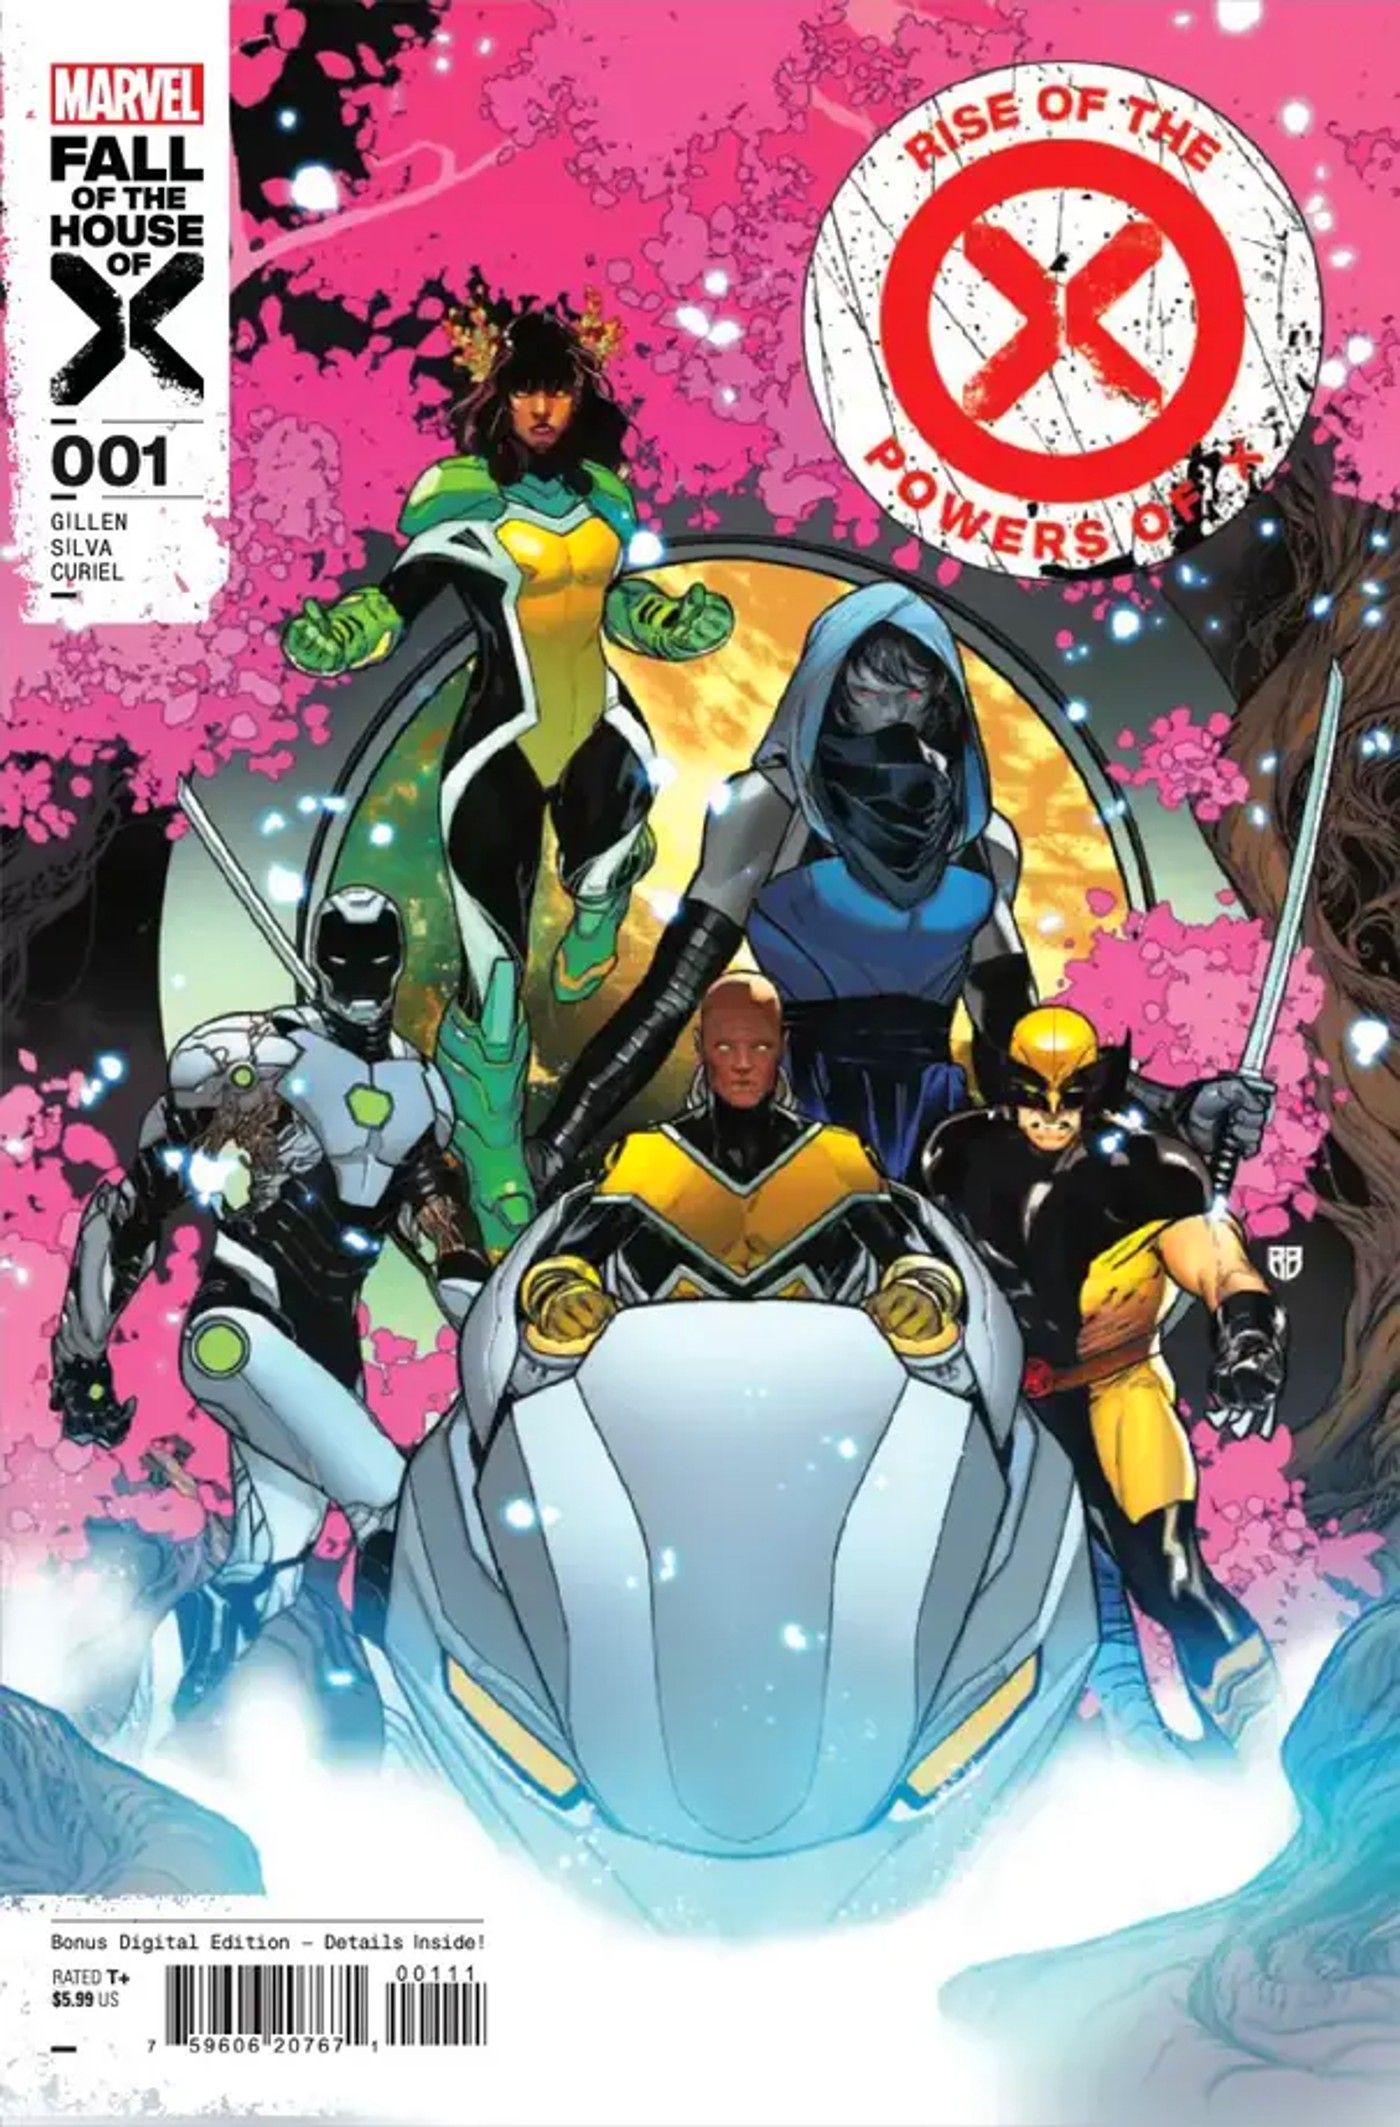 rise of the powers of x x-men 1 cover art-1